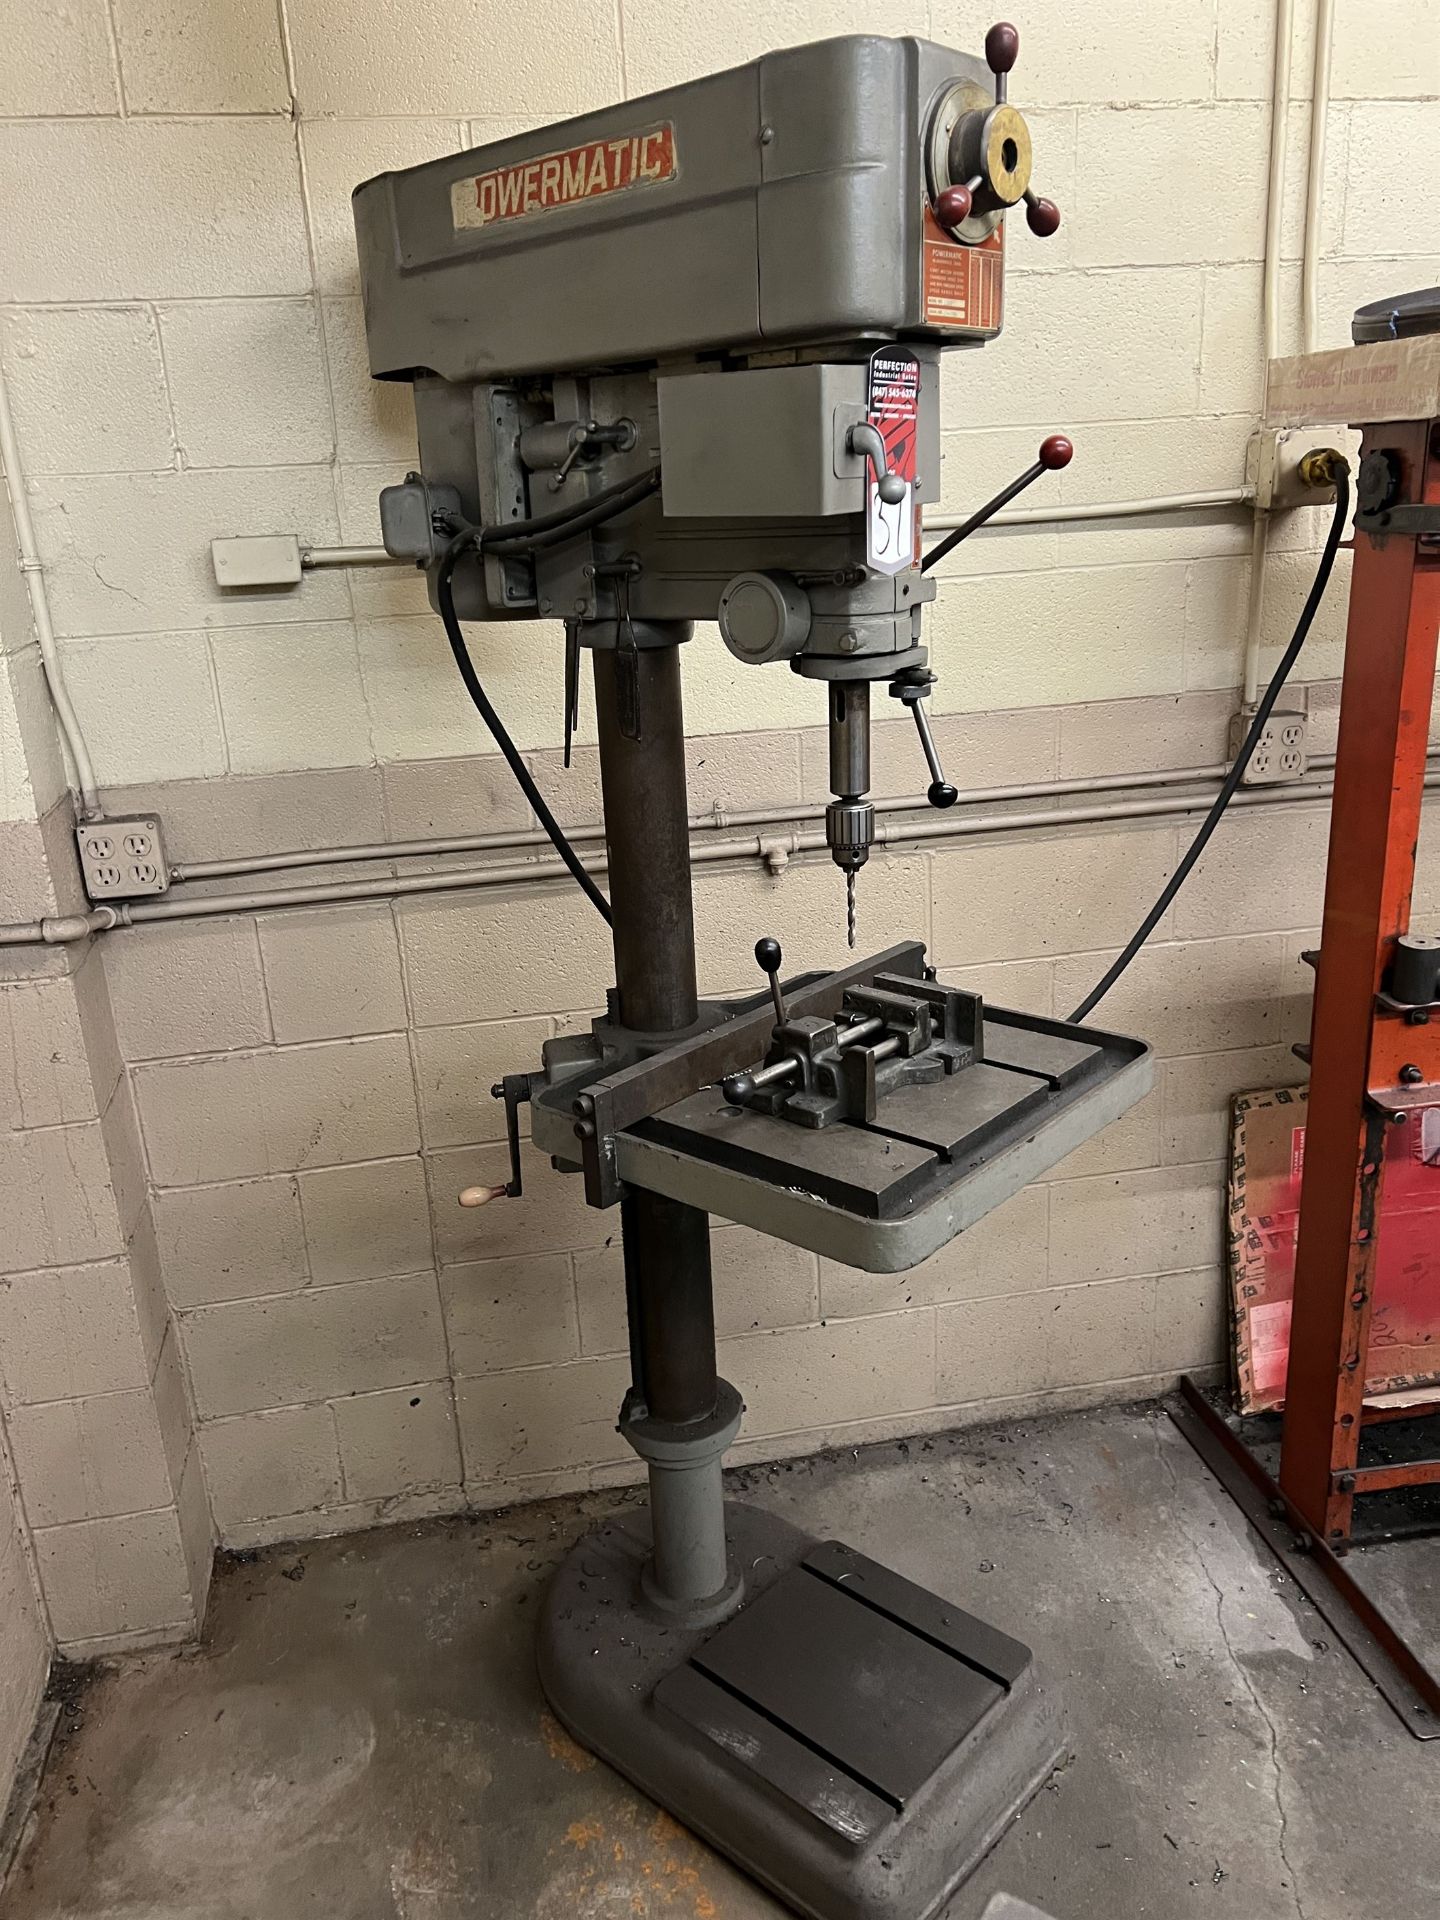 POWERMATIC 1200 Drill Press, s/n 65-6334, 18" x 15-1/2" Table, 300-2000 RPM (This lot is located - Image 2 of 6